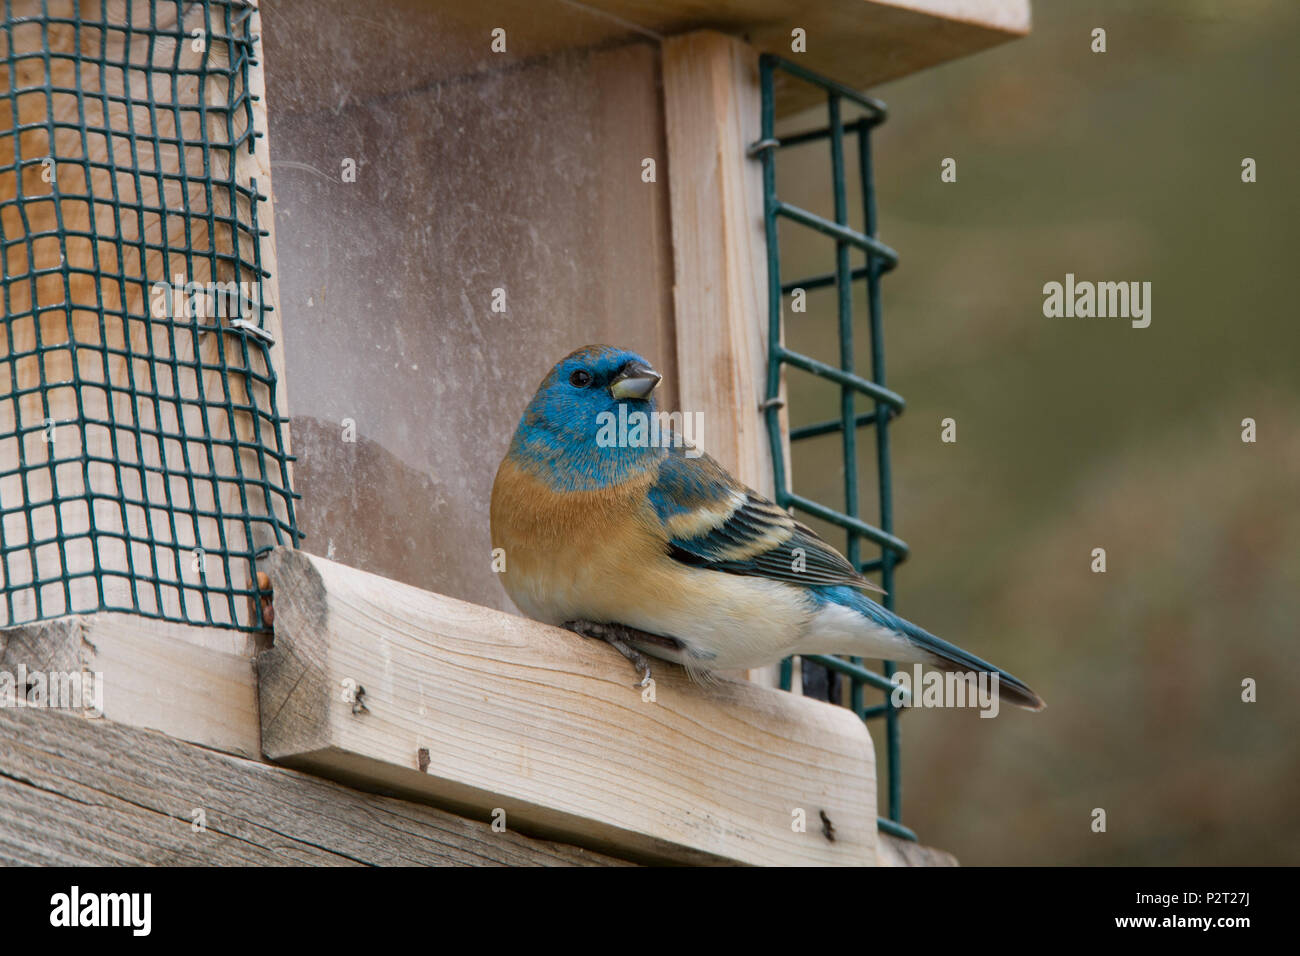 Beautiful male Lazuli bunting (Passerina amoena) on a bird feeder.  Frequent feeder visitors, Lazuli like sunflower, millet, and thistle seed. Stock Photo